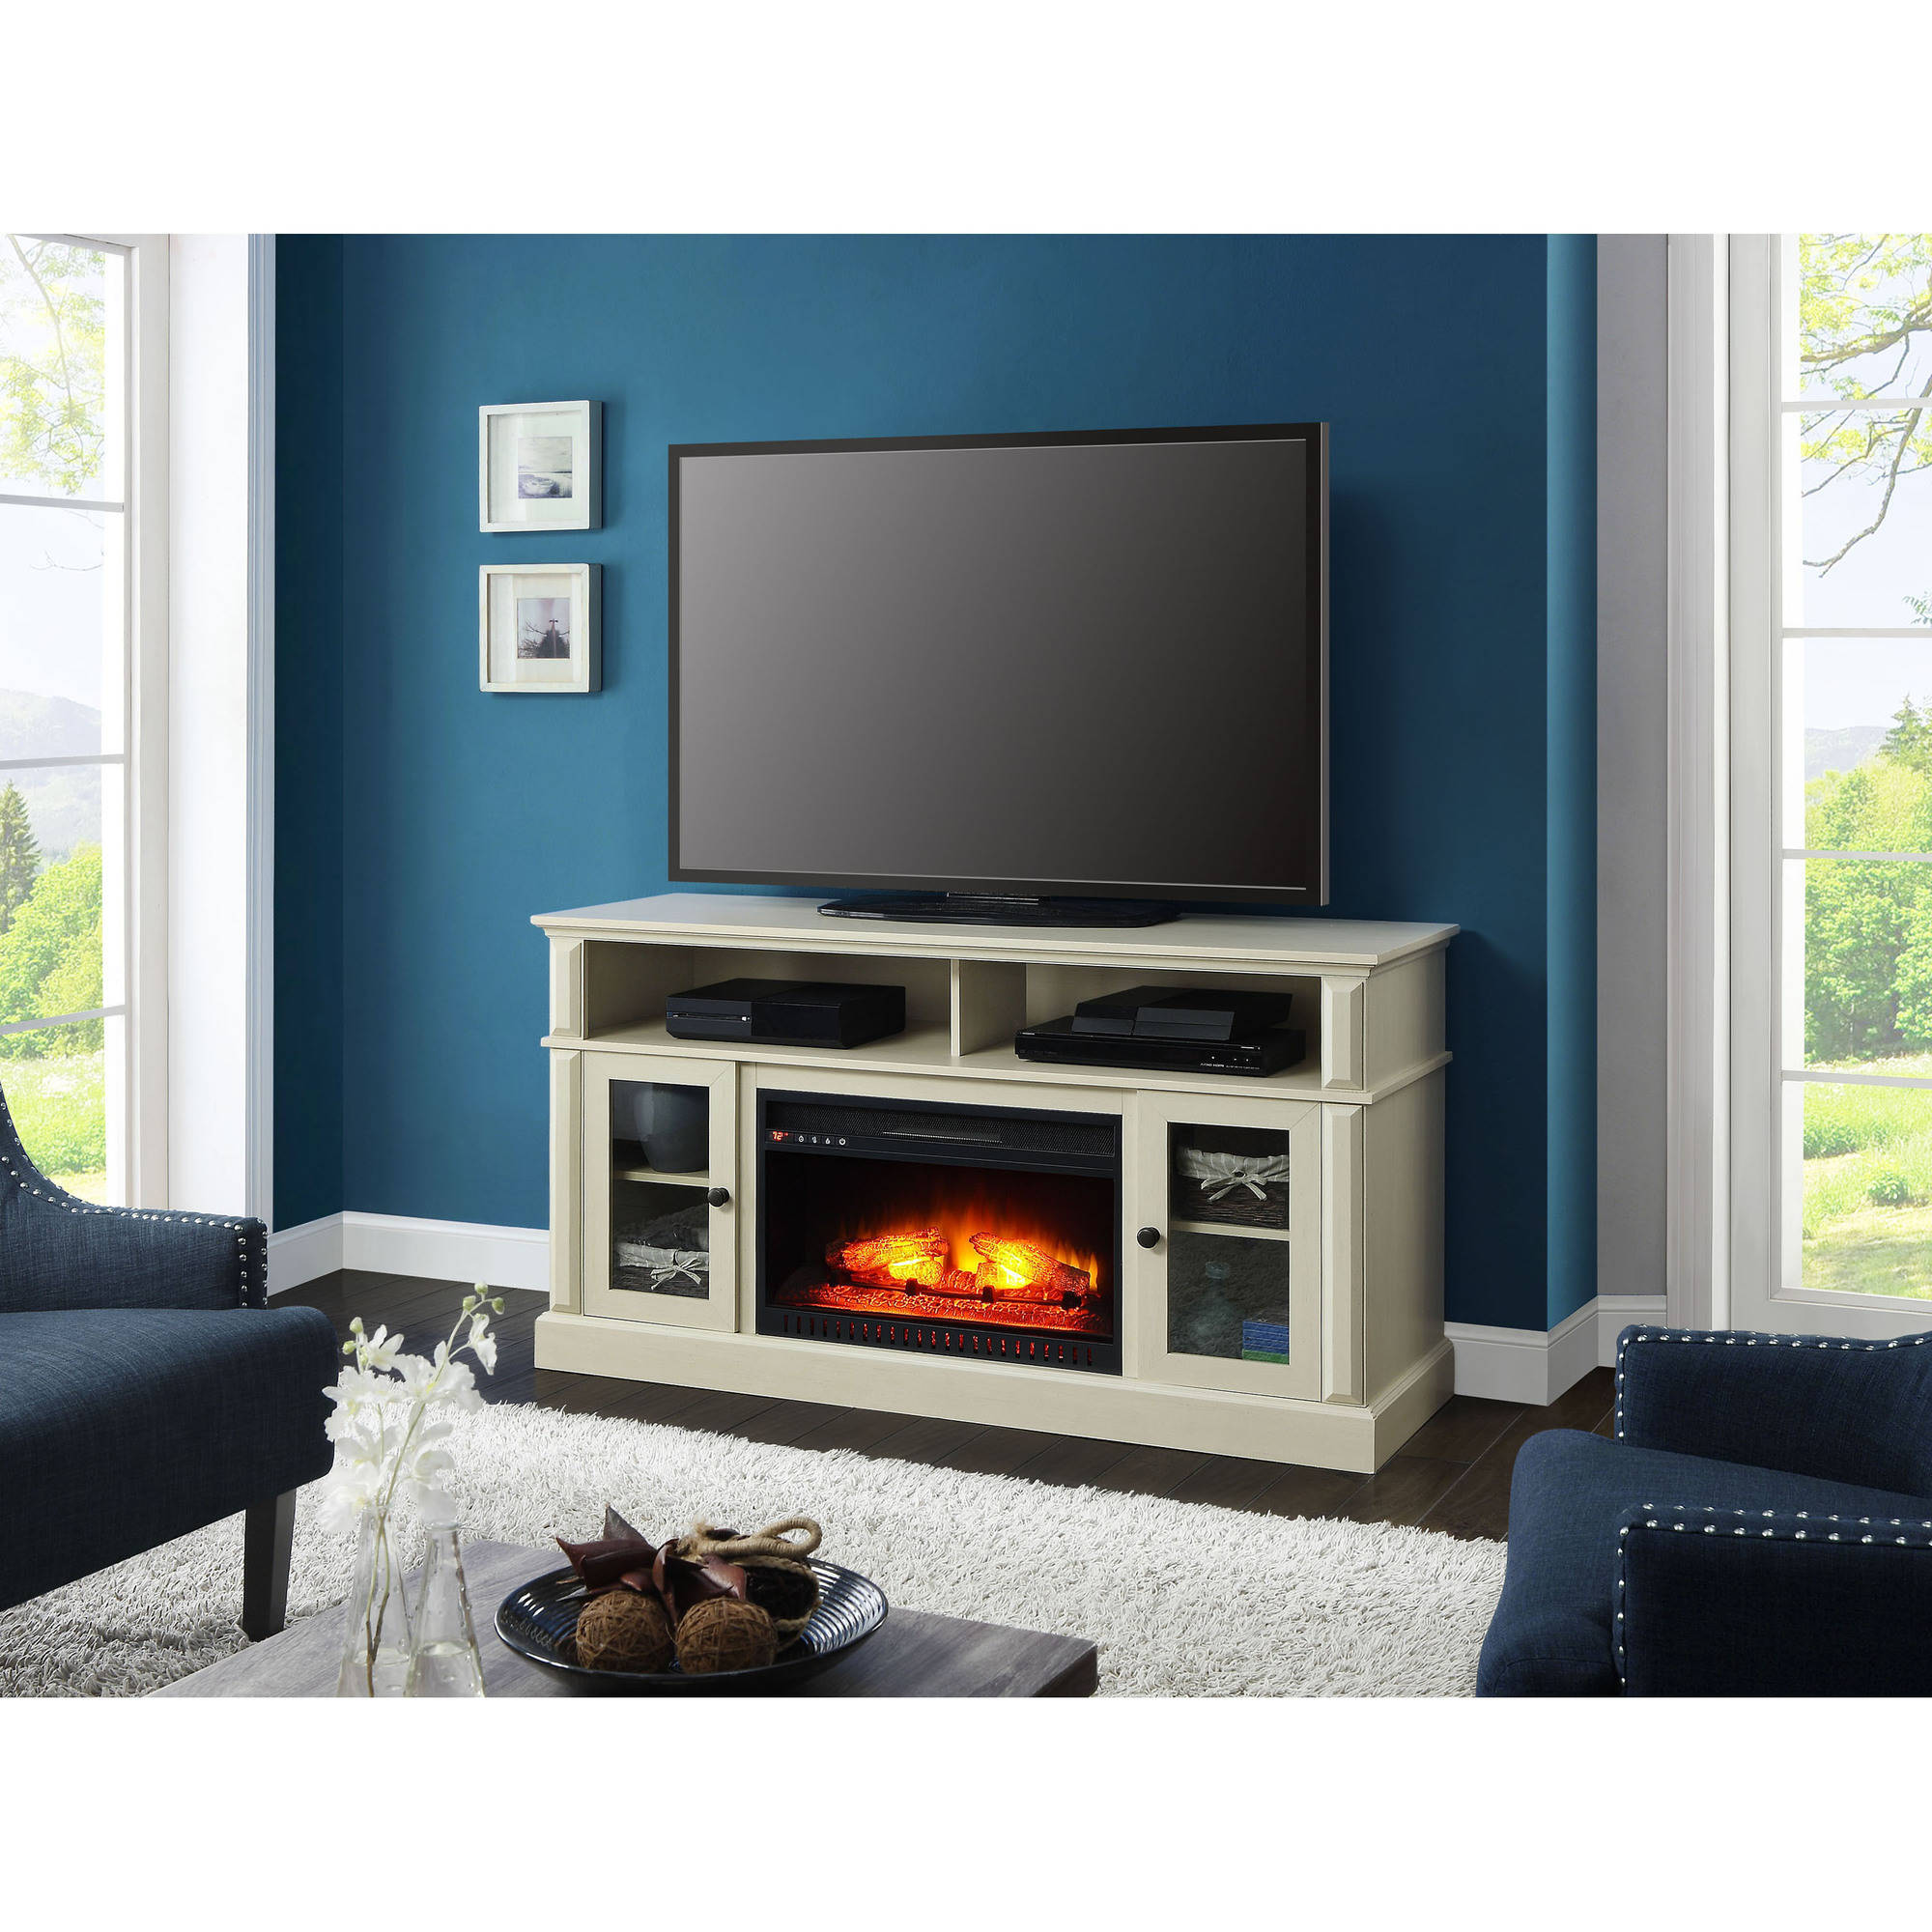 50 Inch Electric Fireplace Tv Stand Lovely Whalen Barston Media Fireplace for Tv S Up to 70 Multiple